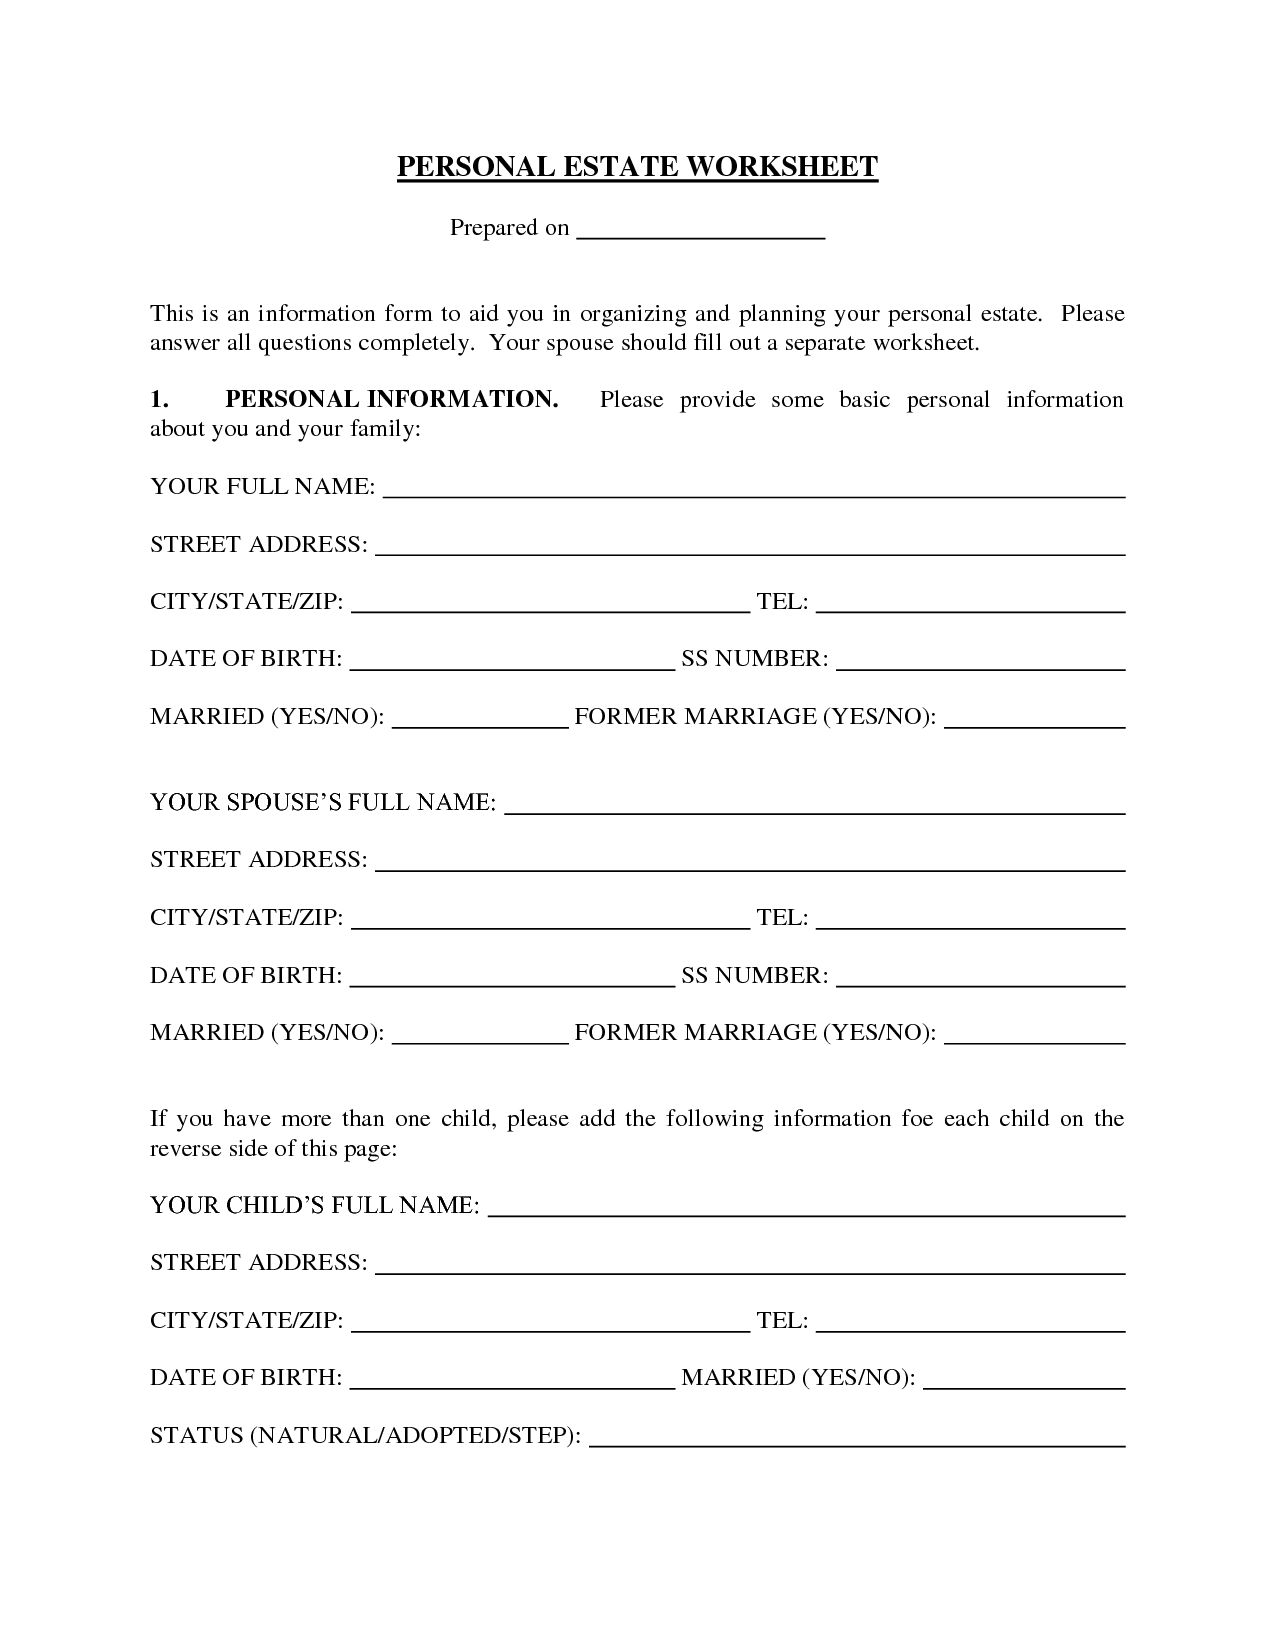 Basic Personal Information Form Image